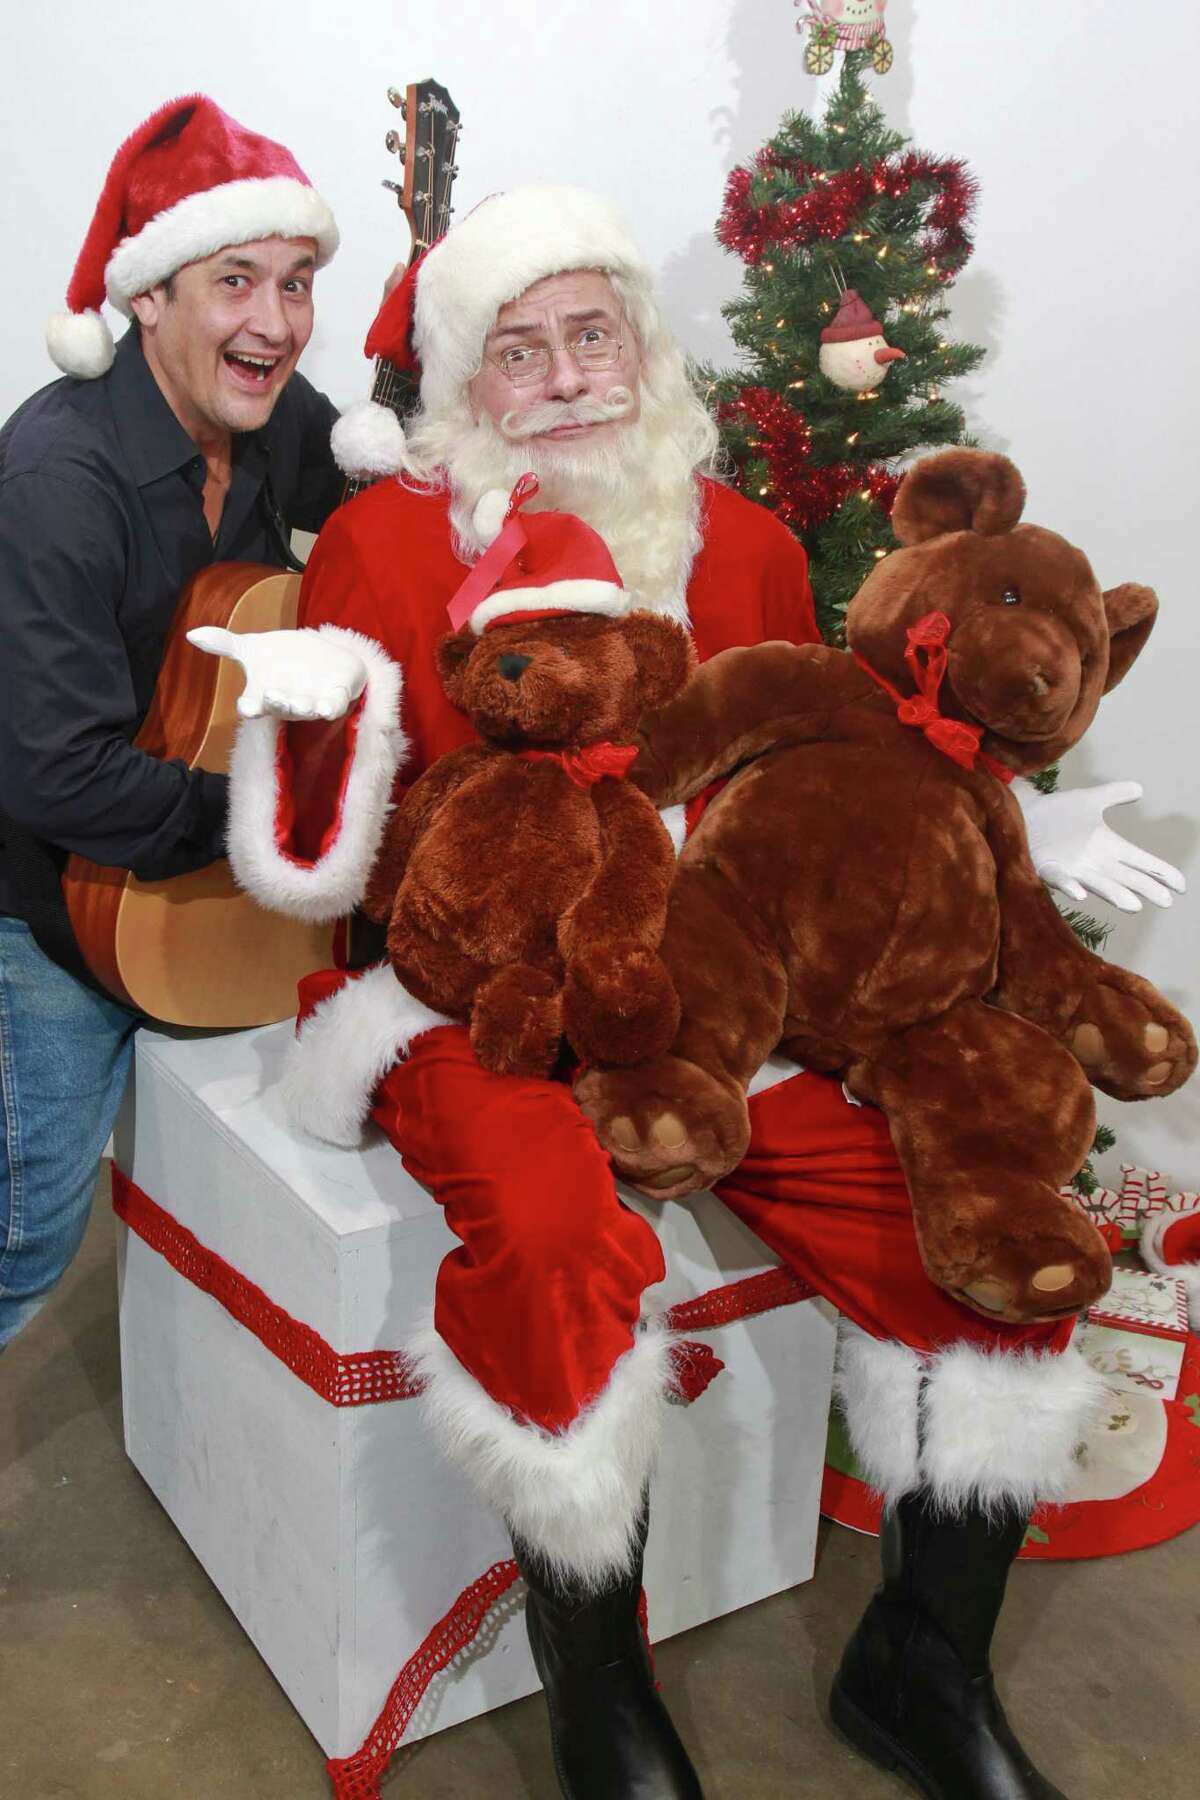 Luis Galindo, left, and Scott Burkell as Santa, in this scene from the Stark Naked Theatre Company's premiere comedy "Ho Ho Humbug" written by and starring Scott Burkell. (For the Chronicle/Gary Fountain, November 22, 2014)